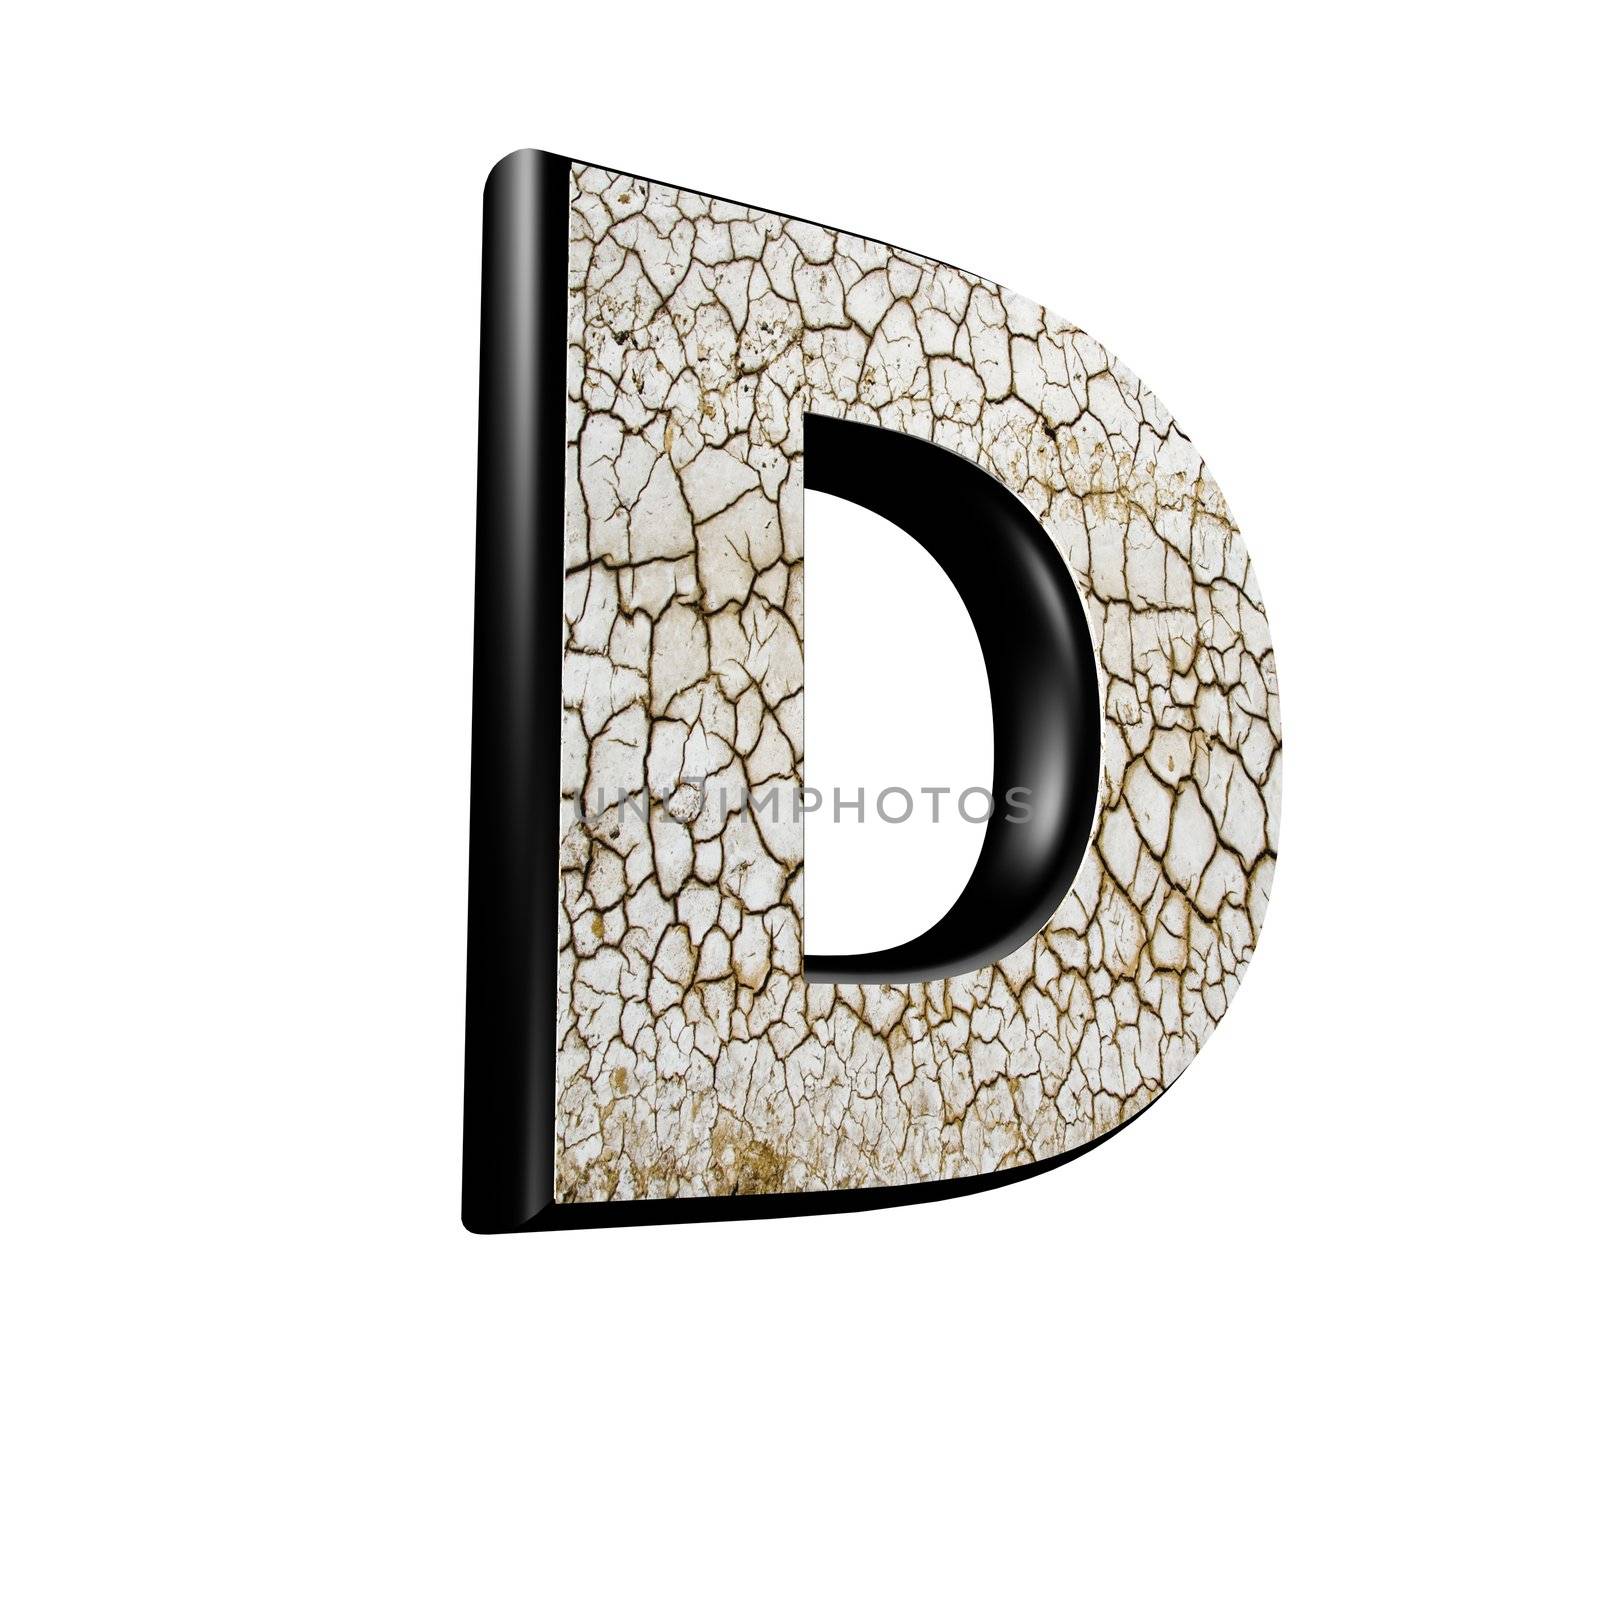 abstract 3d letter with dry ground texture - D by chrisroll